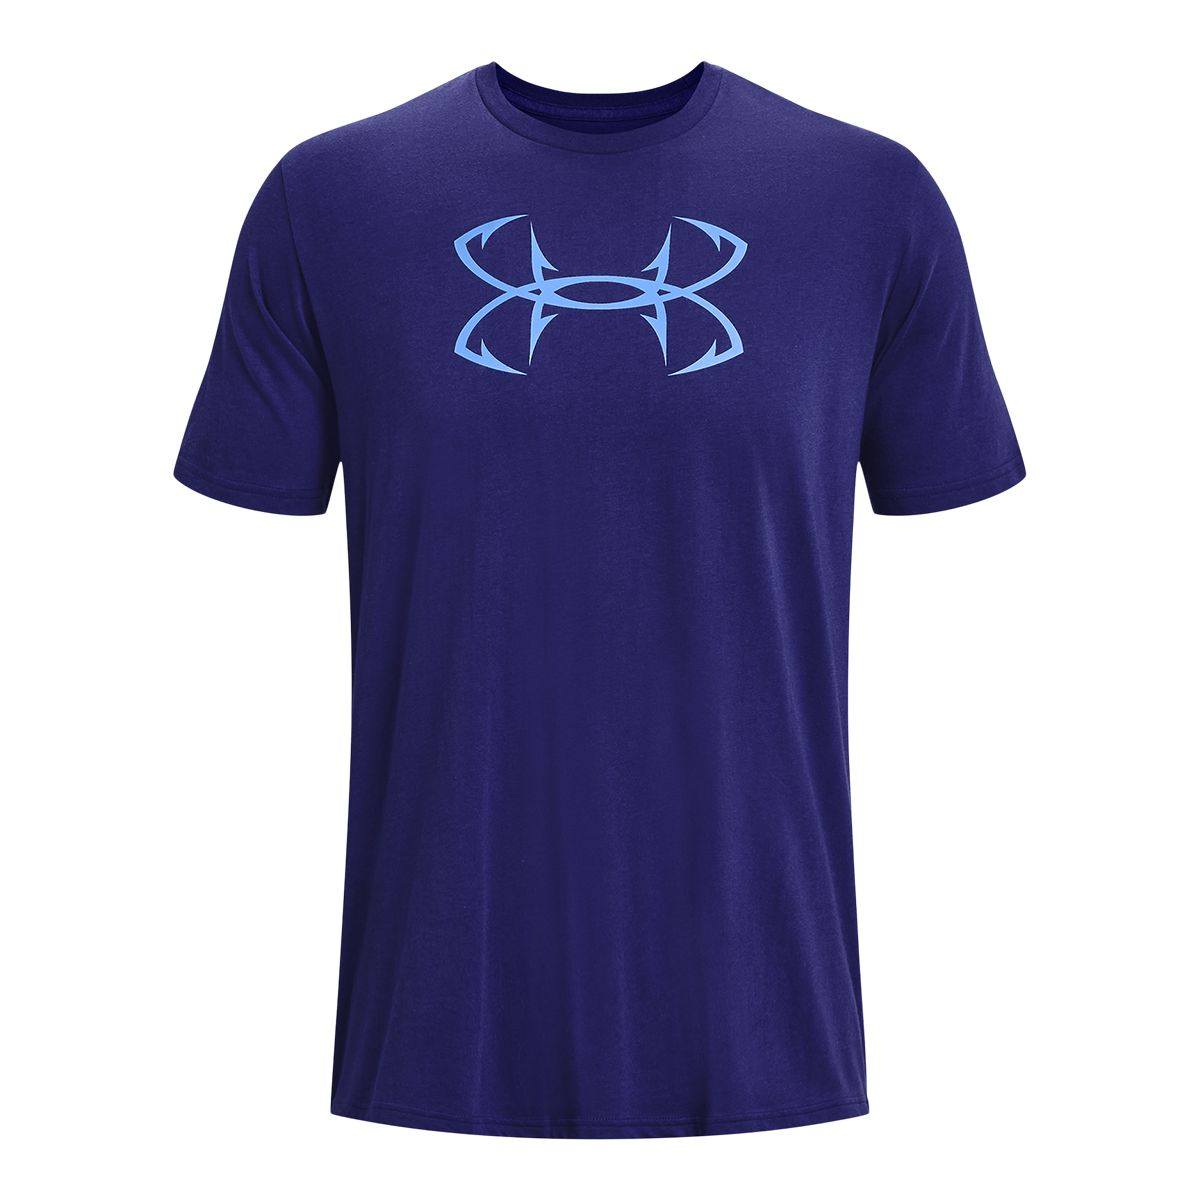 https://media-www.sportchek.ca/product/div-03-softgoods/dpt-72-casual-clothing/sdpt-01-mens/333989638/ua-m-fish-hook-logo-ss-tee-223-sonar-blue-ca1d79d3-1579-459d-bbdc-eef9f3369166-jpgrendition.jpg?imdensity=1&imwidth=1244&impolicy=mZoom